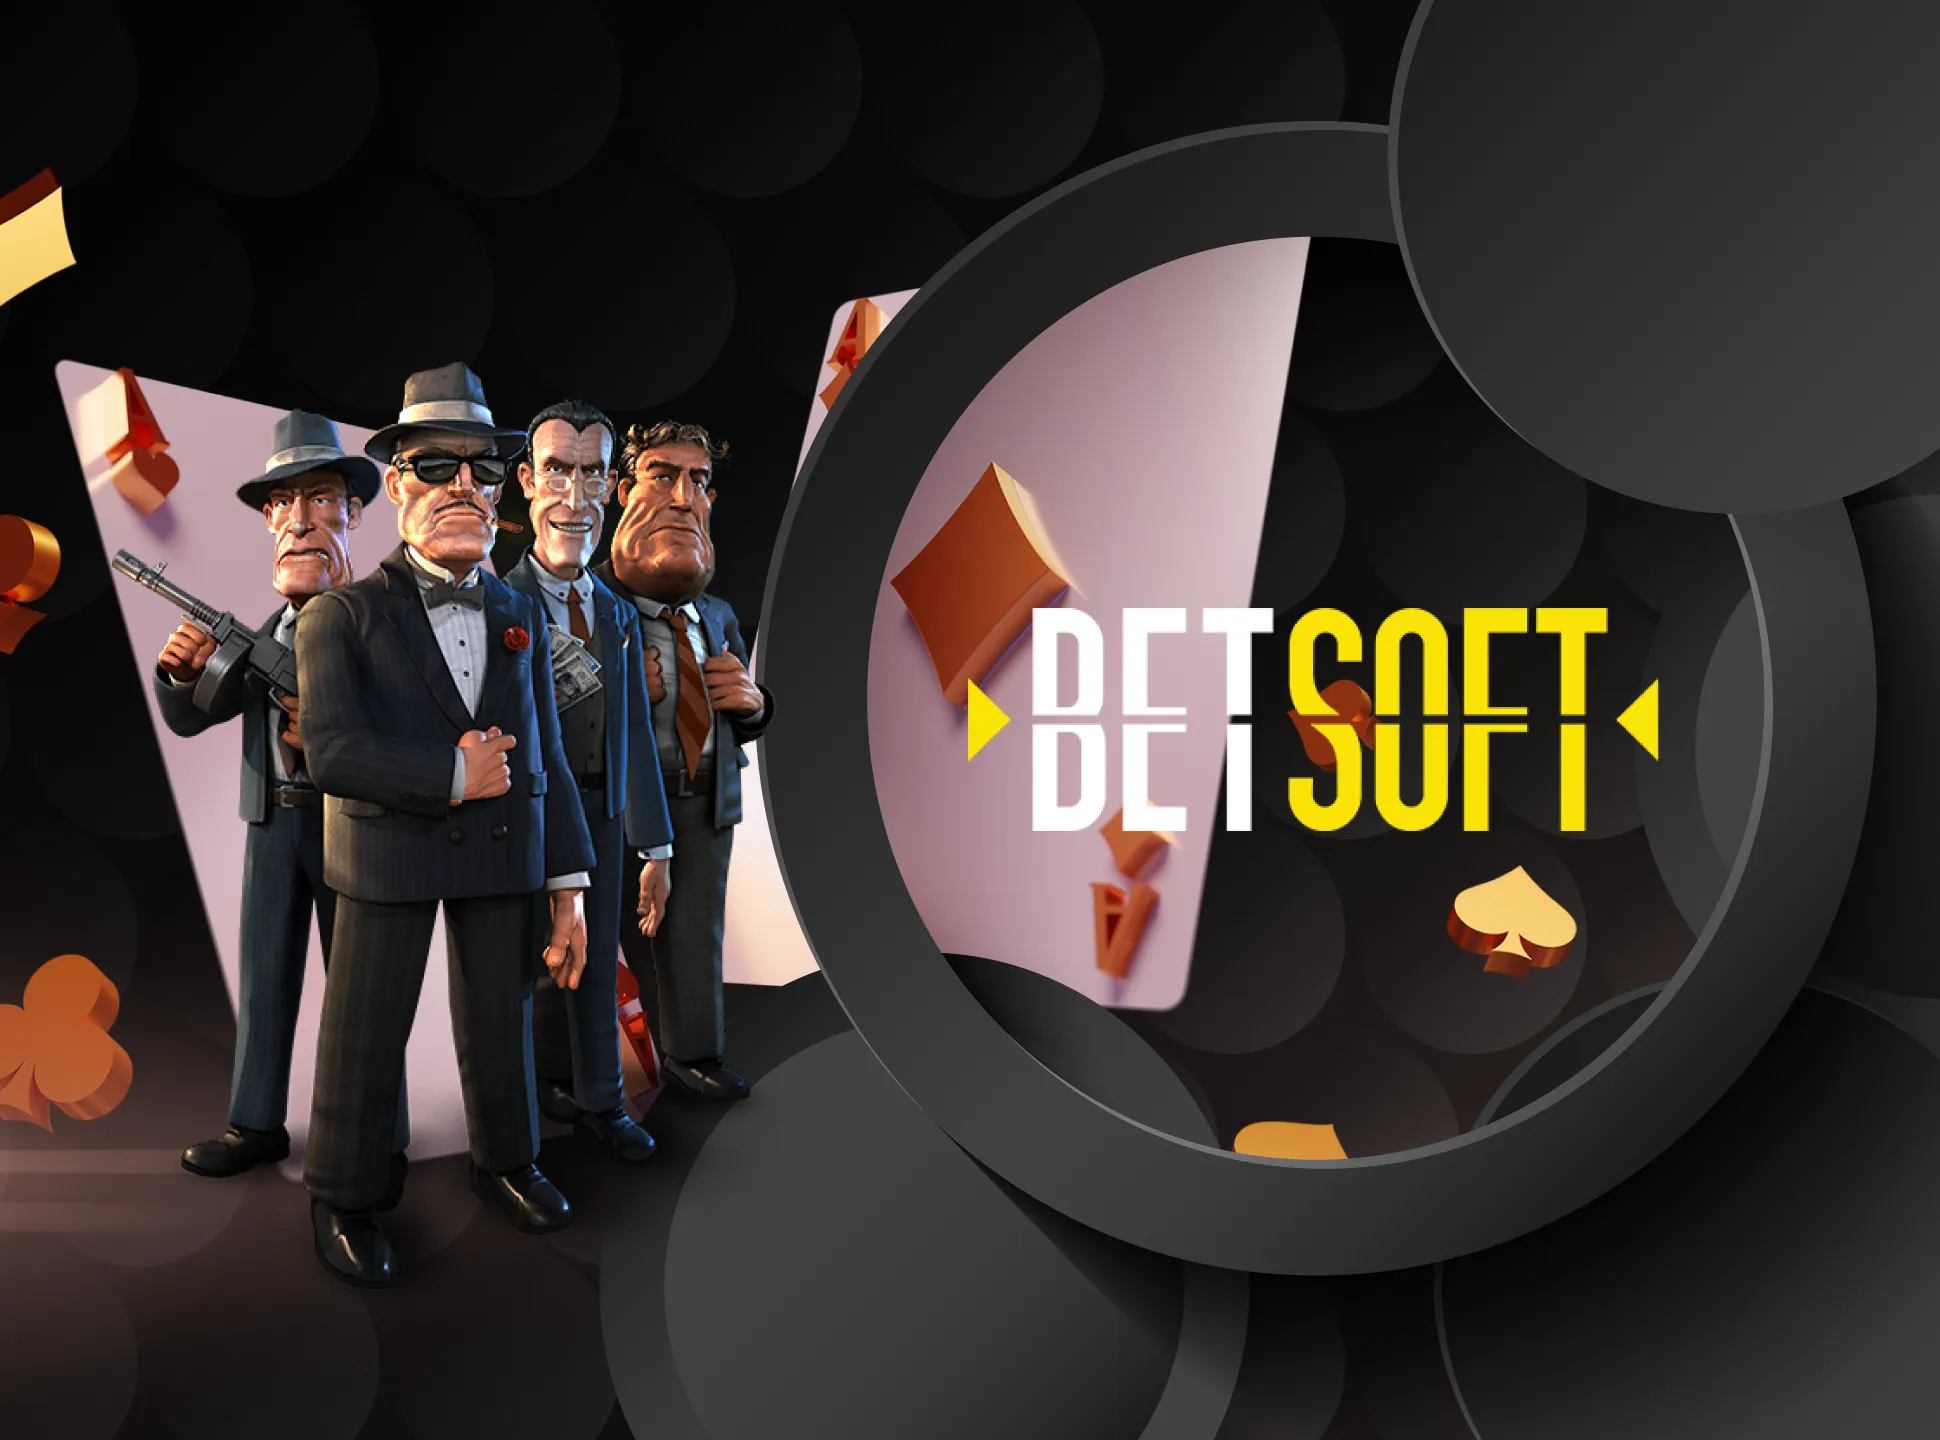 Betsoft provides online casino with qualirt 3D slots.